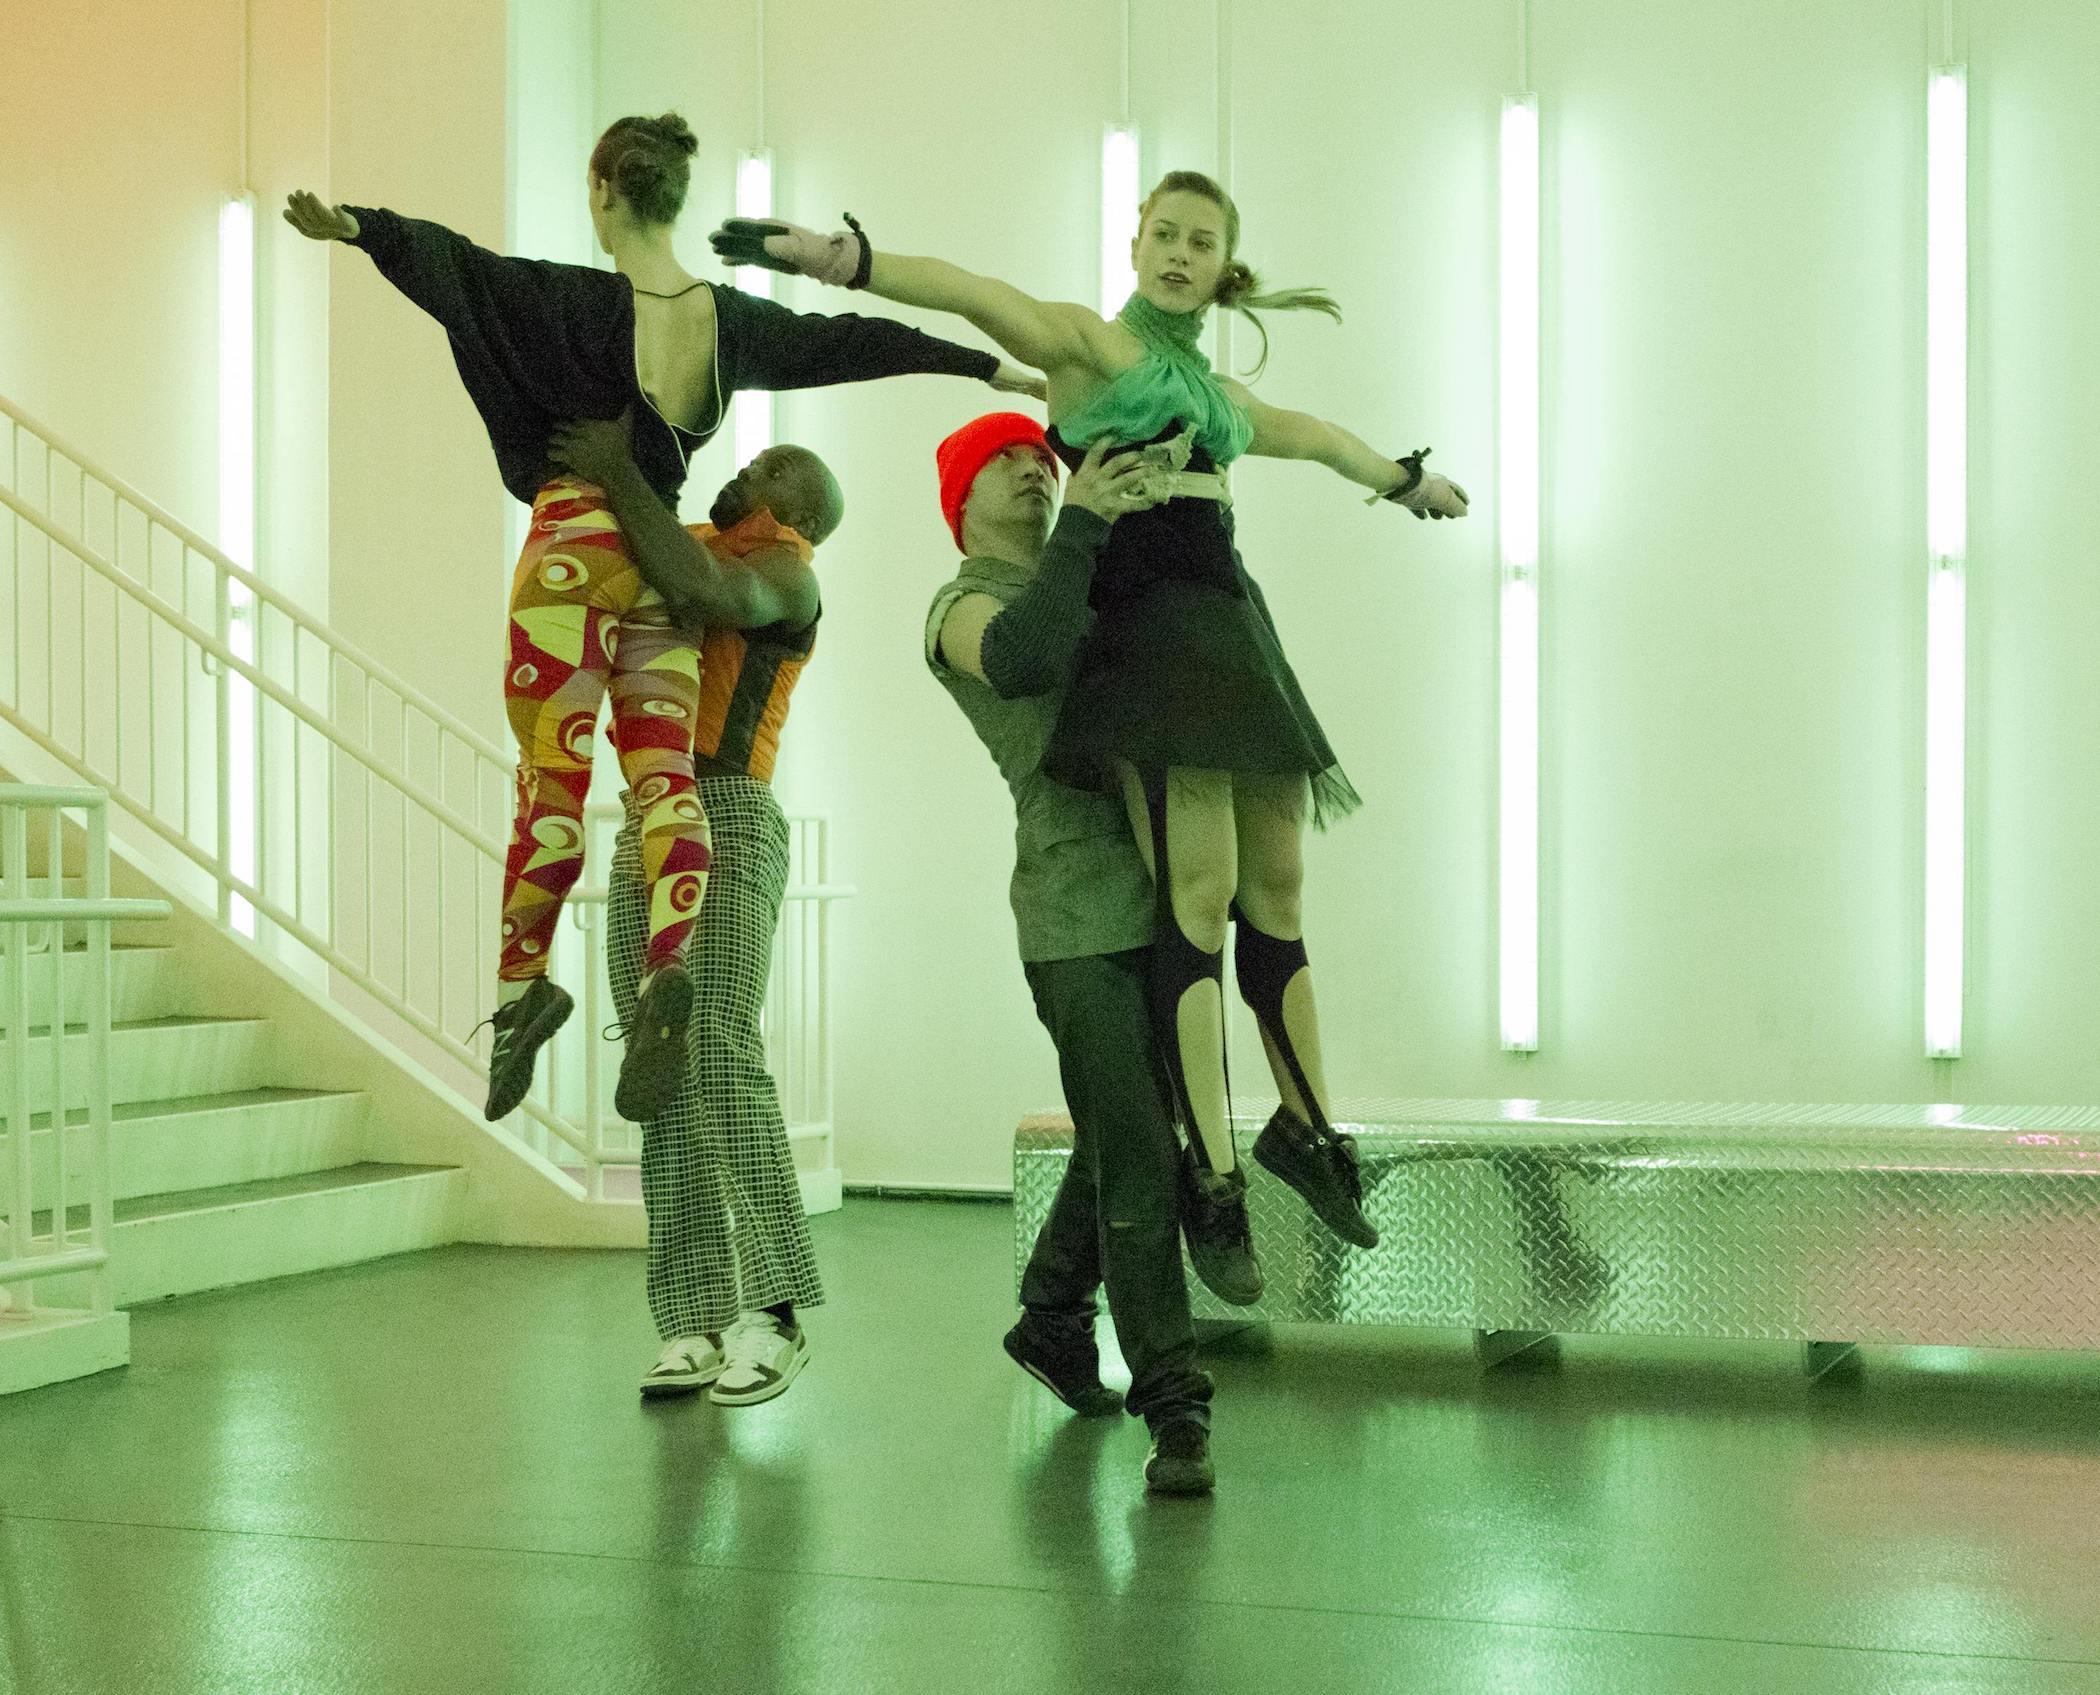 Two make dancers hold aloft two female dancers in front of a stairwell in a room lit with vertically installed neon tube lights.